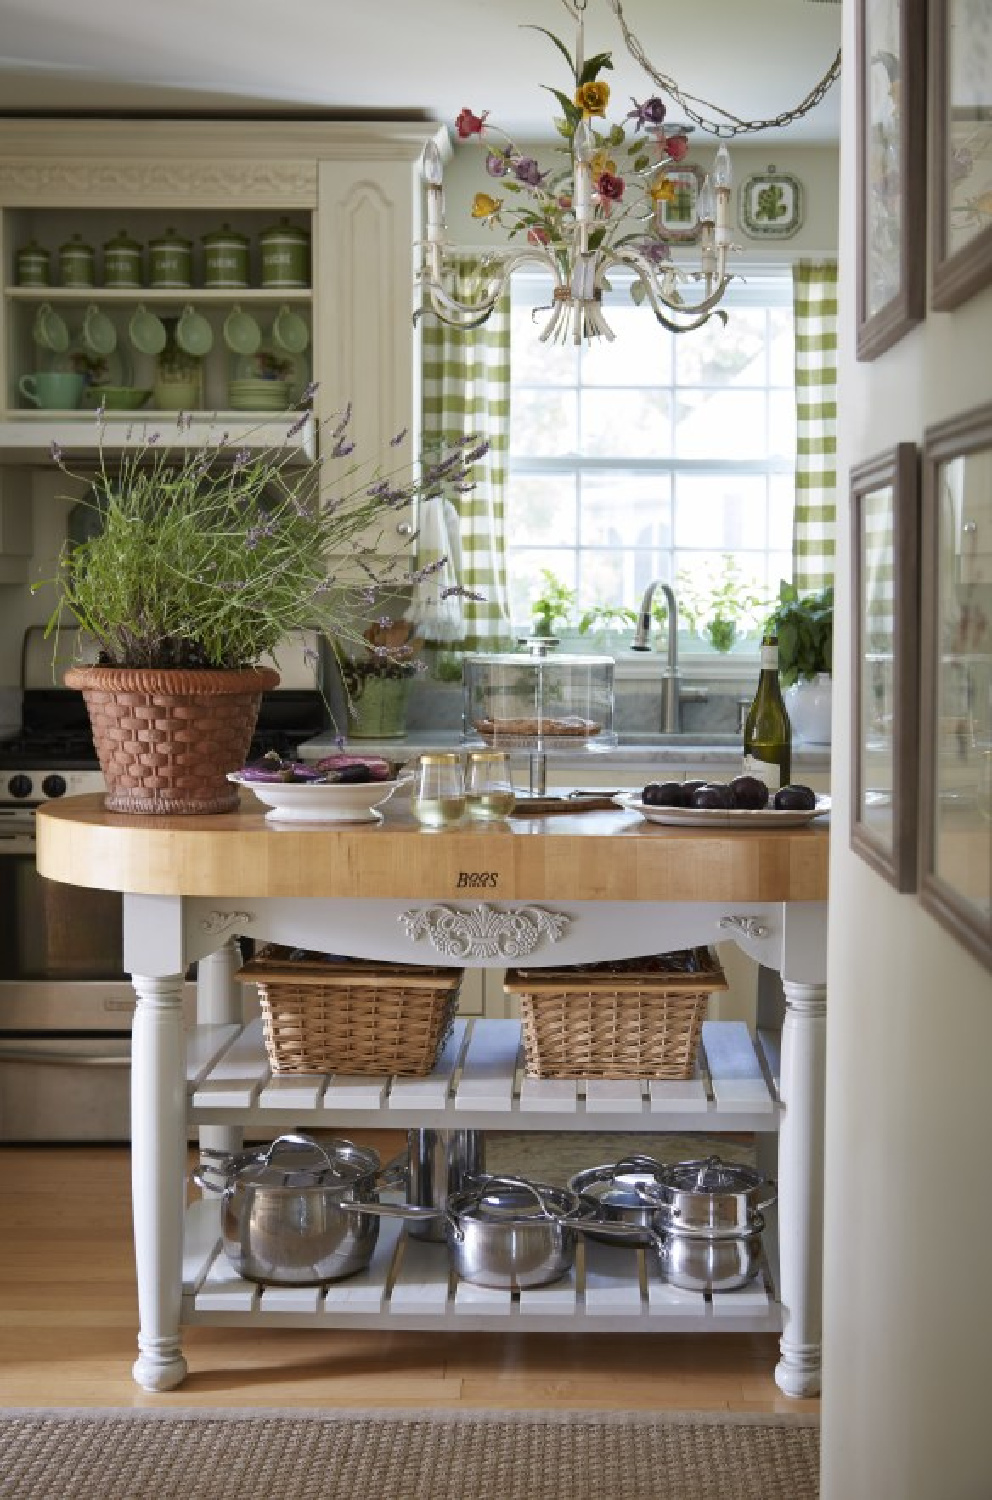 French country kitchen of Amy of Maison Decor featured in Nora Murphy's book. Nora Murphy Country Style to Inspire! #frenchcountrykitchen #maisondecor #greenkitchen #frenchkitchen #frenchcottage #cottagekitchen #countrystyle #vintagestyle